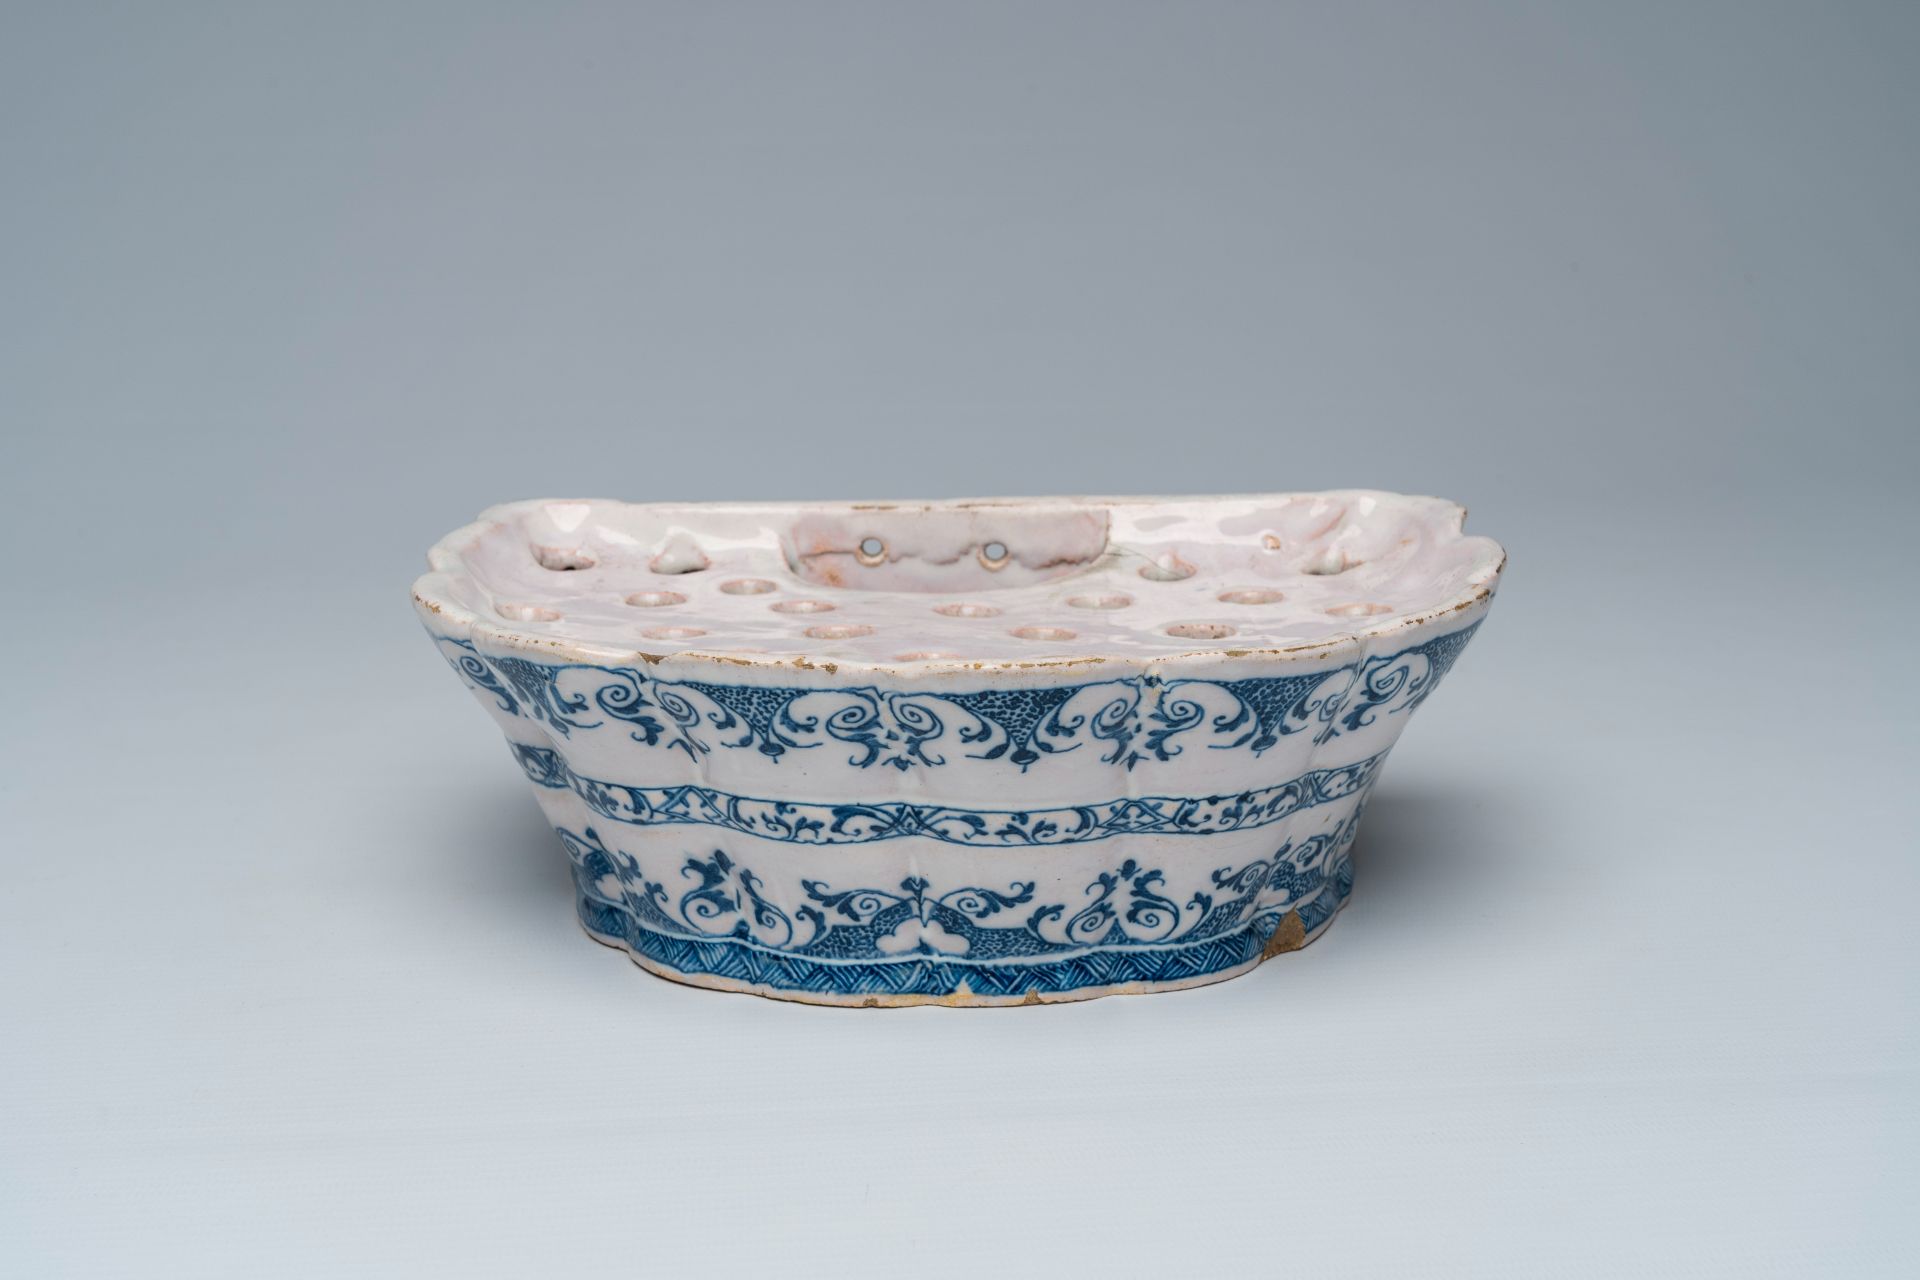 A blue and white Moustiers faience flower holder, France, 18th C.